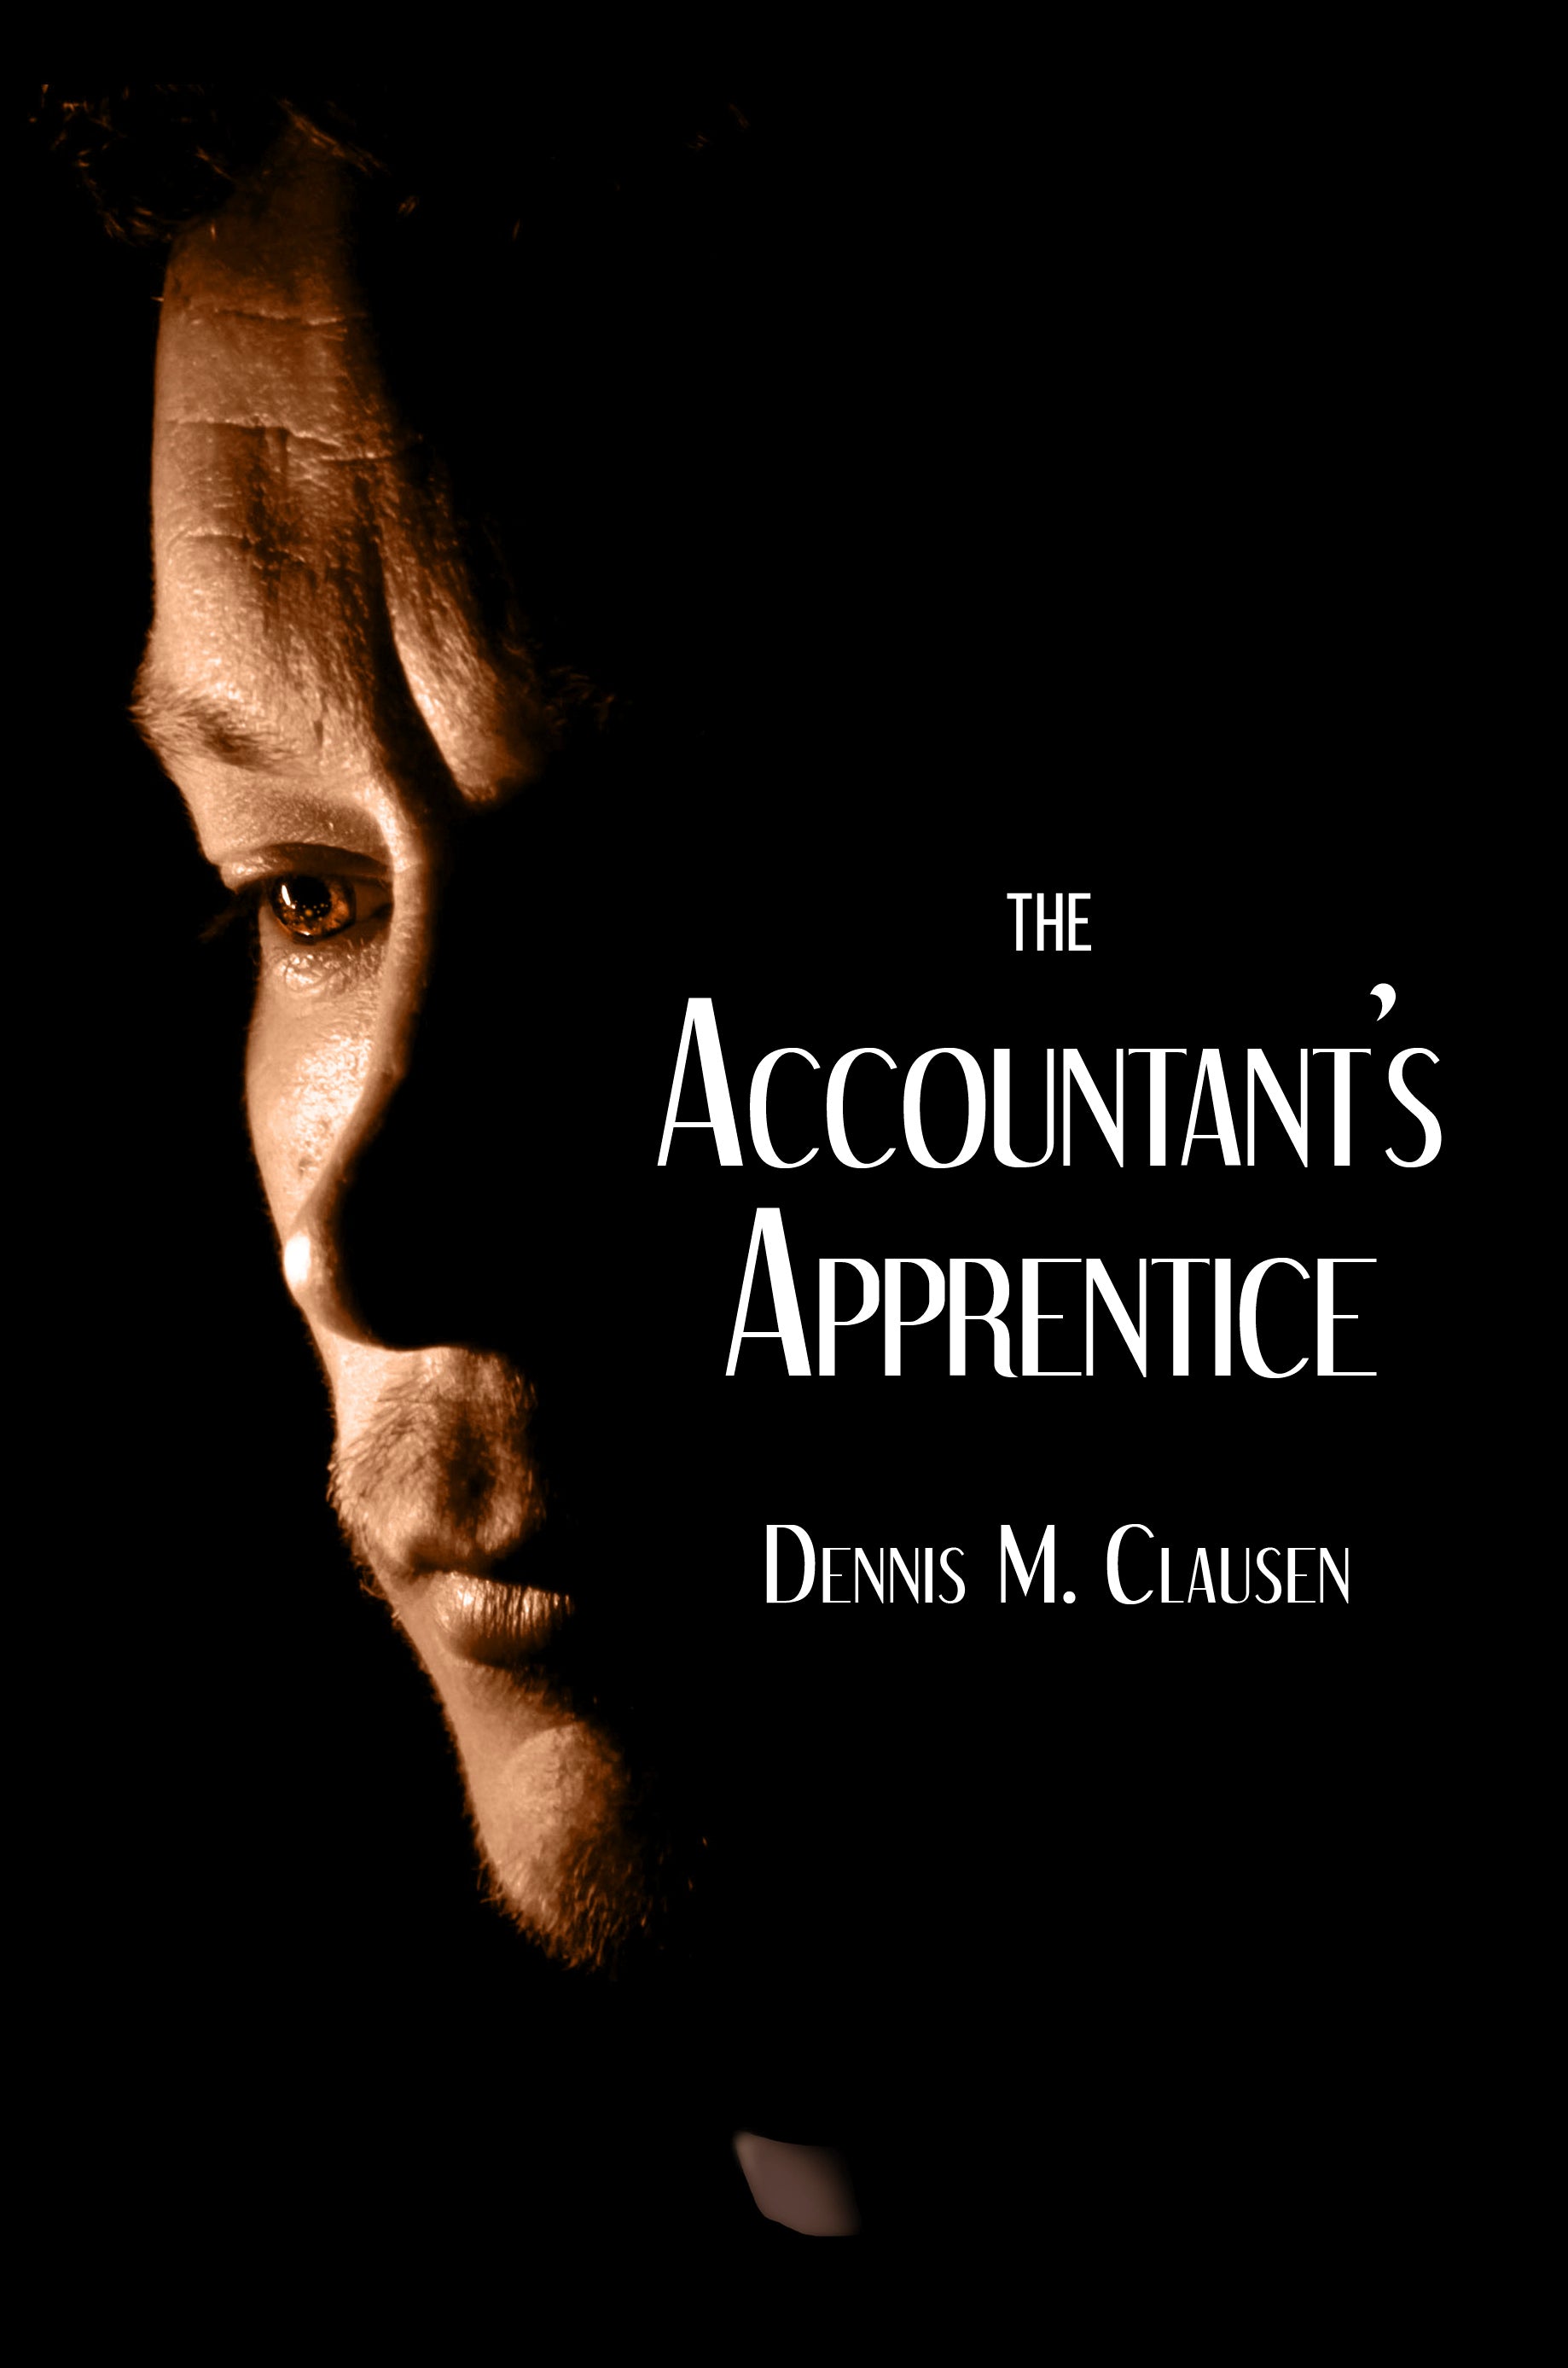 Dennis Clausen’s “The Accountant's Apprentice” is the Brown Posey Press bestseller for January